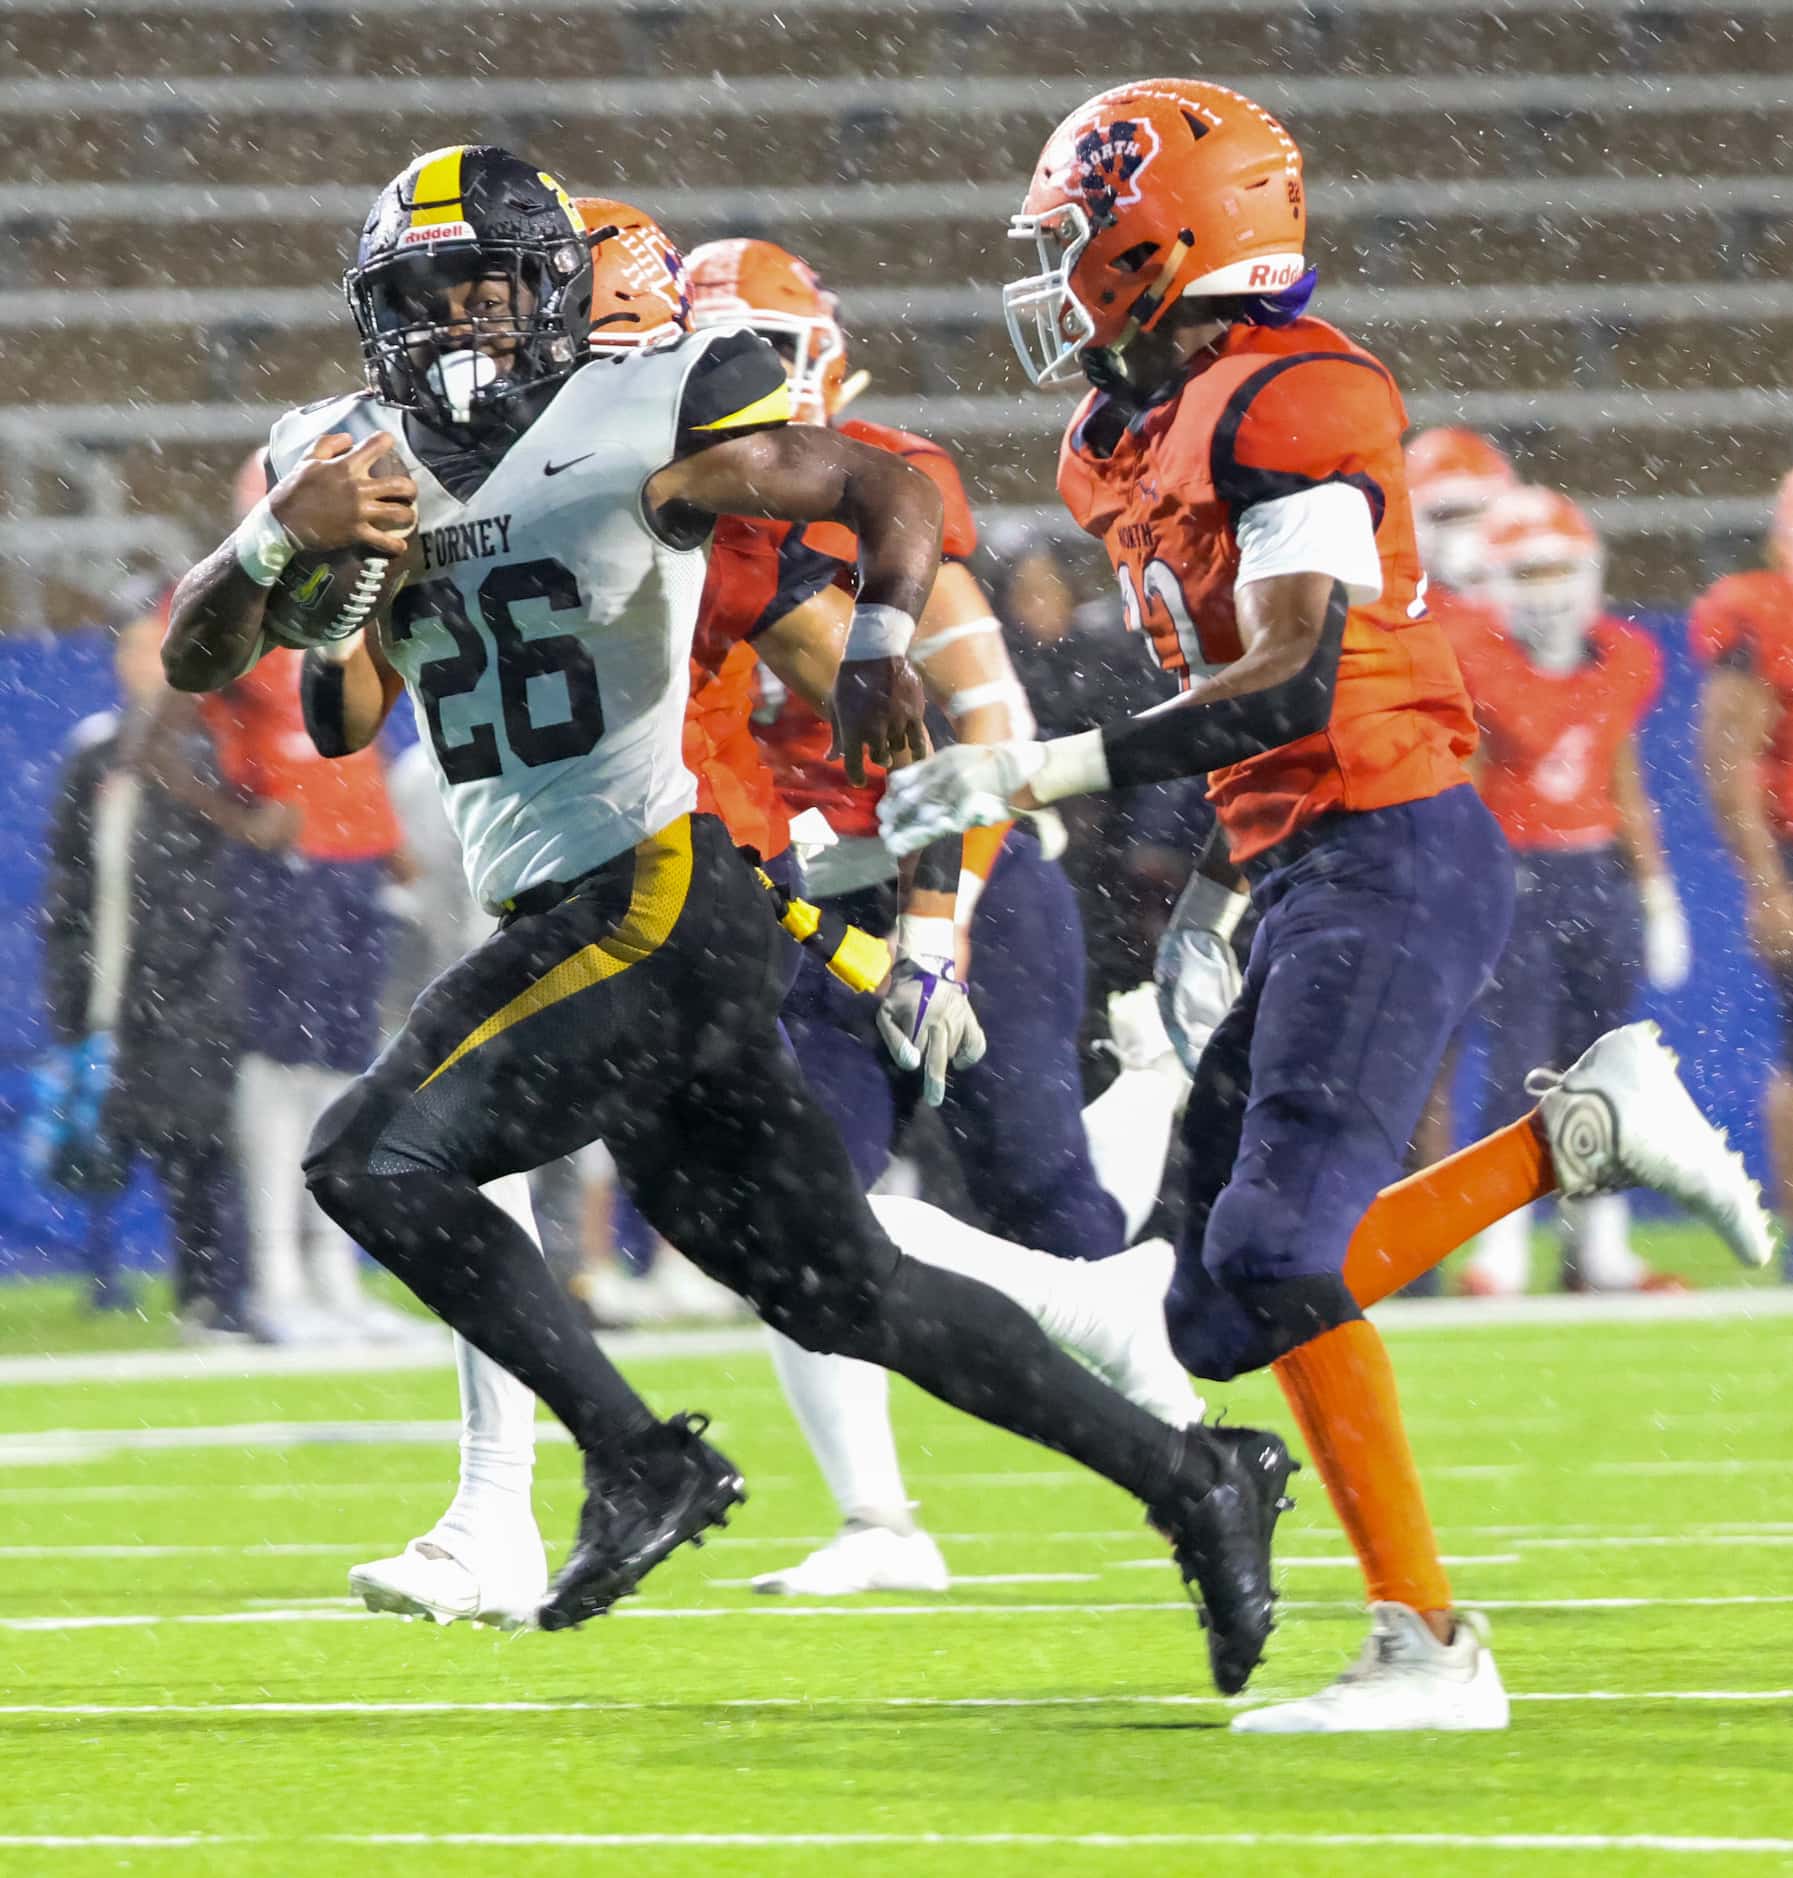 Forney running back Javian Osborne (26) looks to his left as he carries the ball downfield...